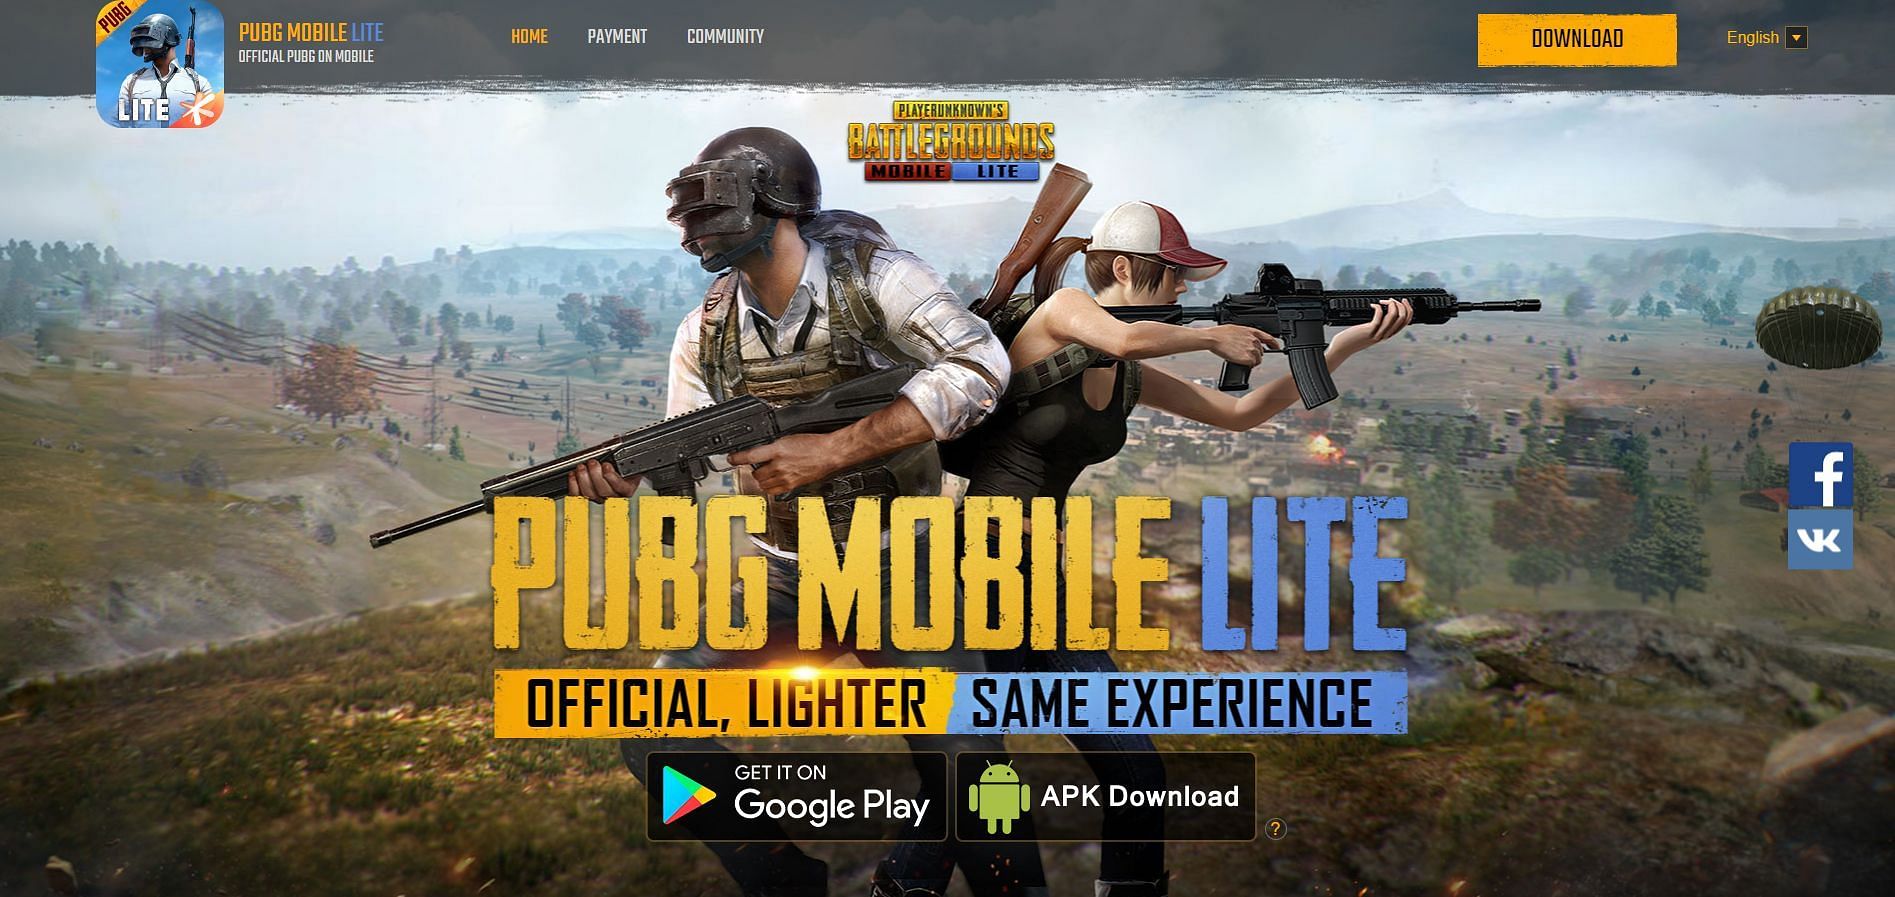 APK file of PUBG Mobile Lite is available on the official website (Image via PUBG Mobile Lite)